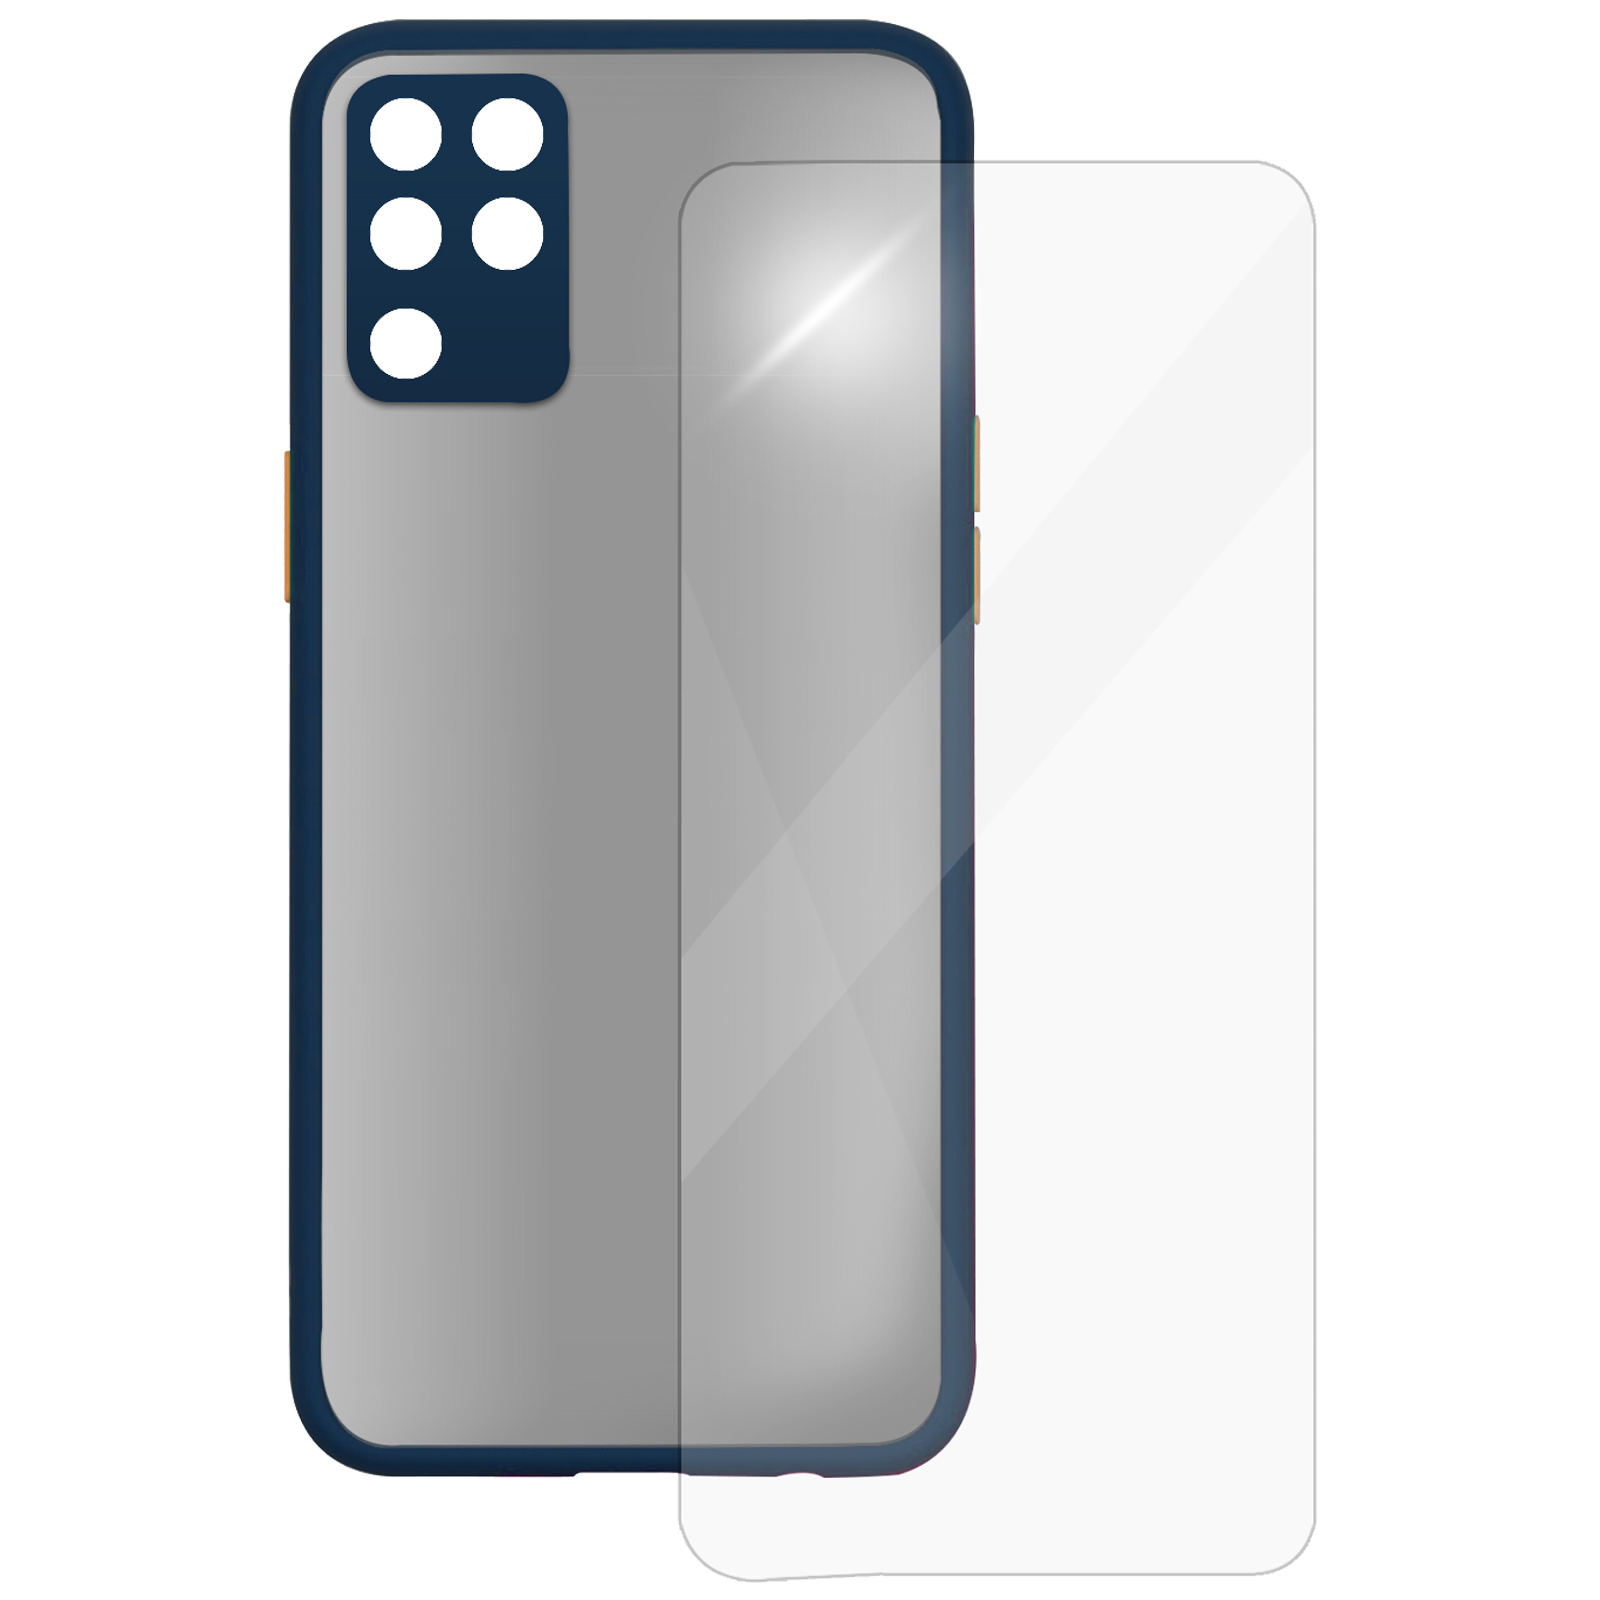 Arrow Camera Duplex Back Case and Screen Protector Bundle For Oppo F19 Pro (Ultra Transparent Visibility, AR-984, Blue)